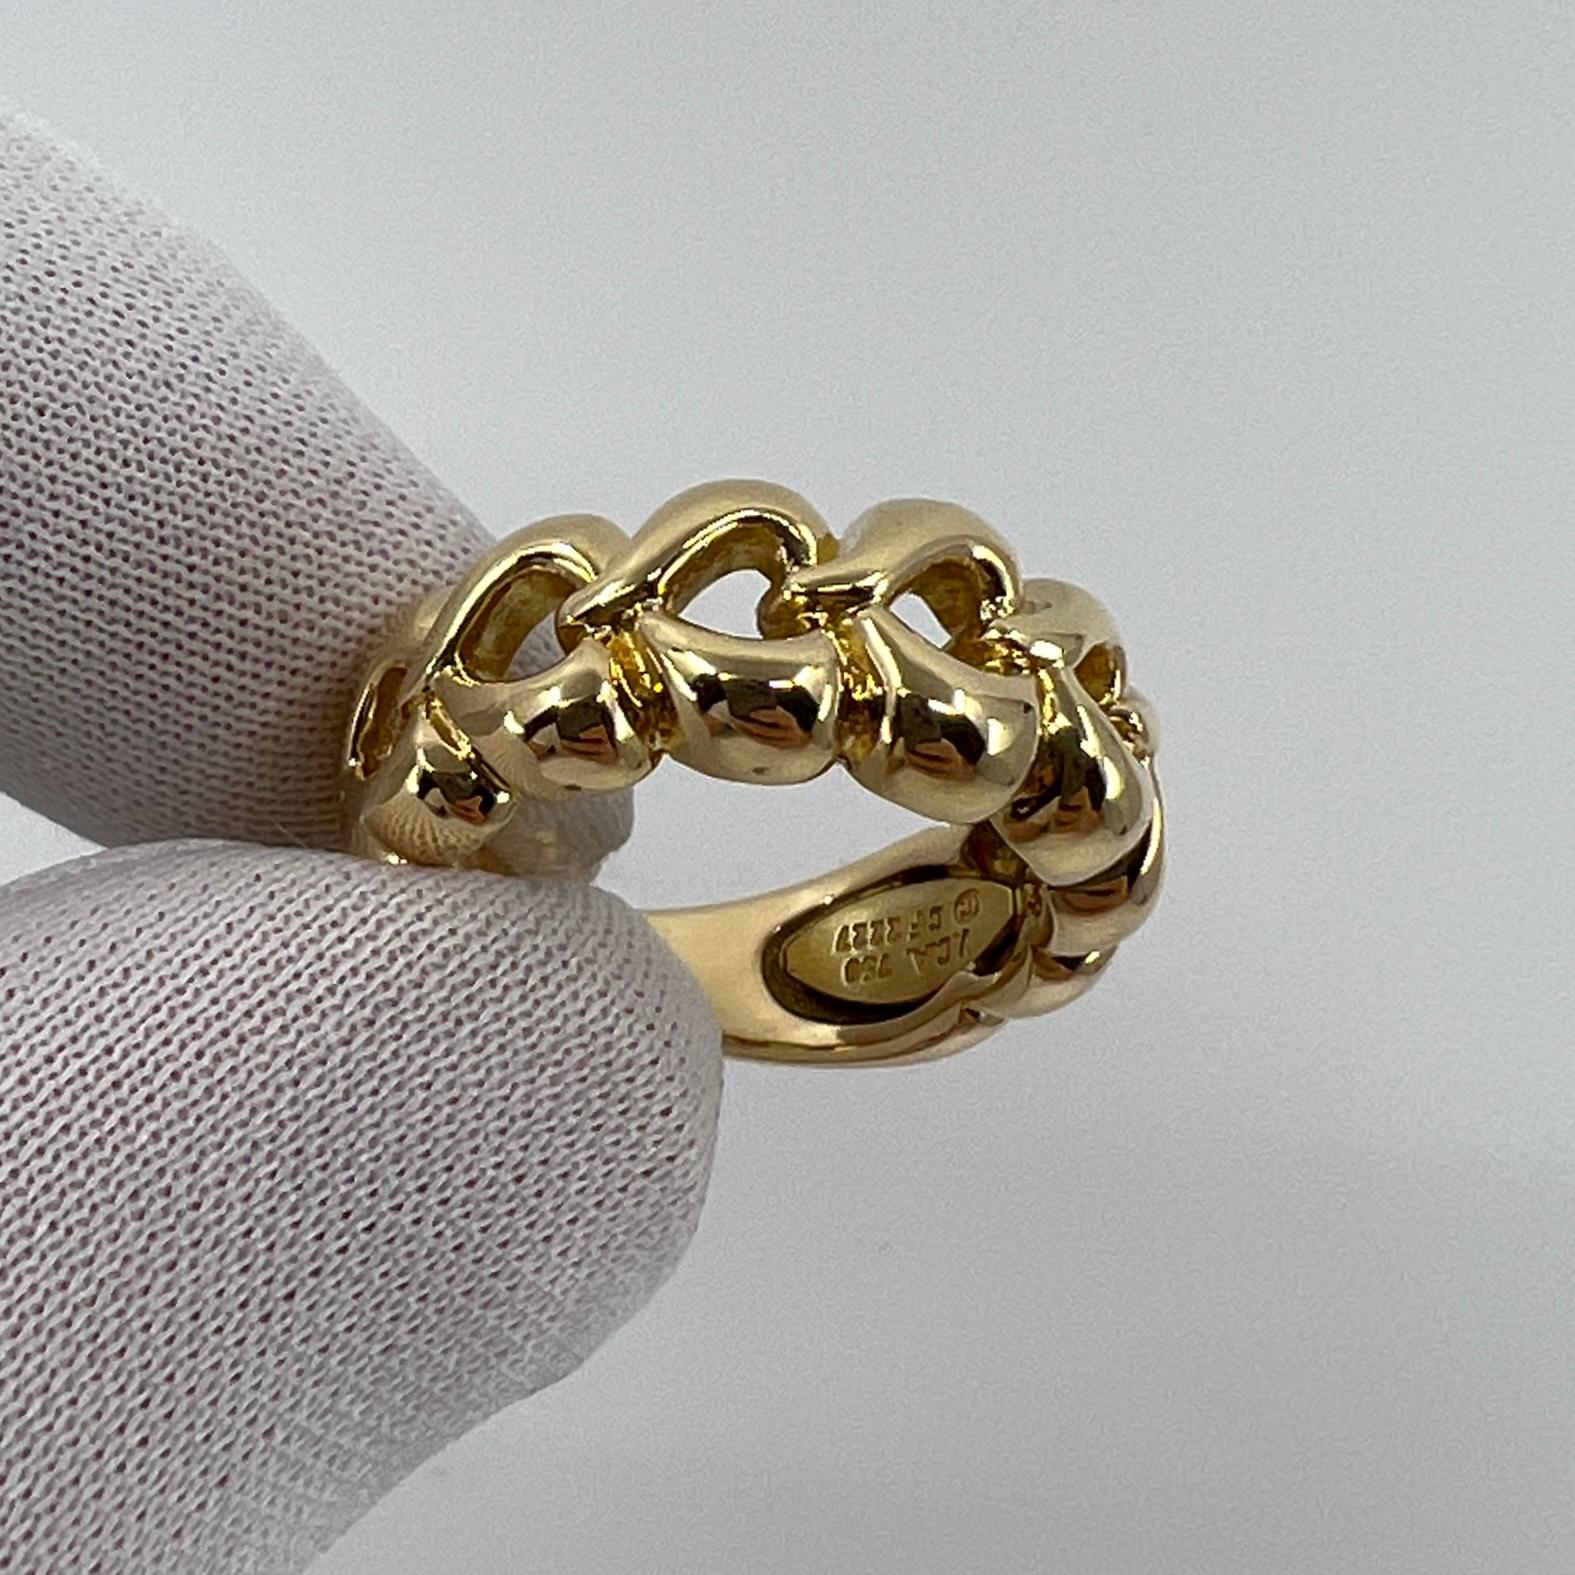 Rare Vintage Van Cleef & Arpels 18k Yellow Gold Open Heart Band Ring with Box 5